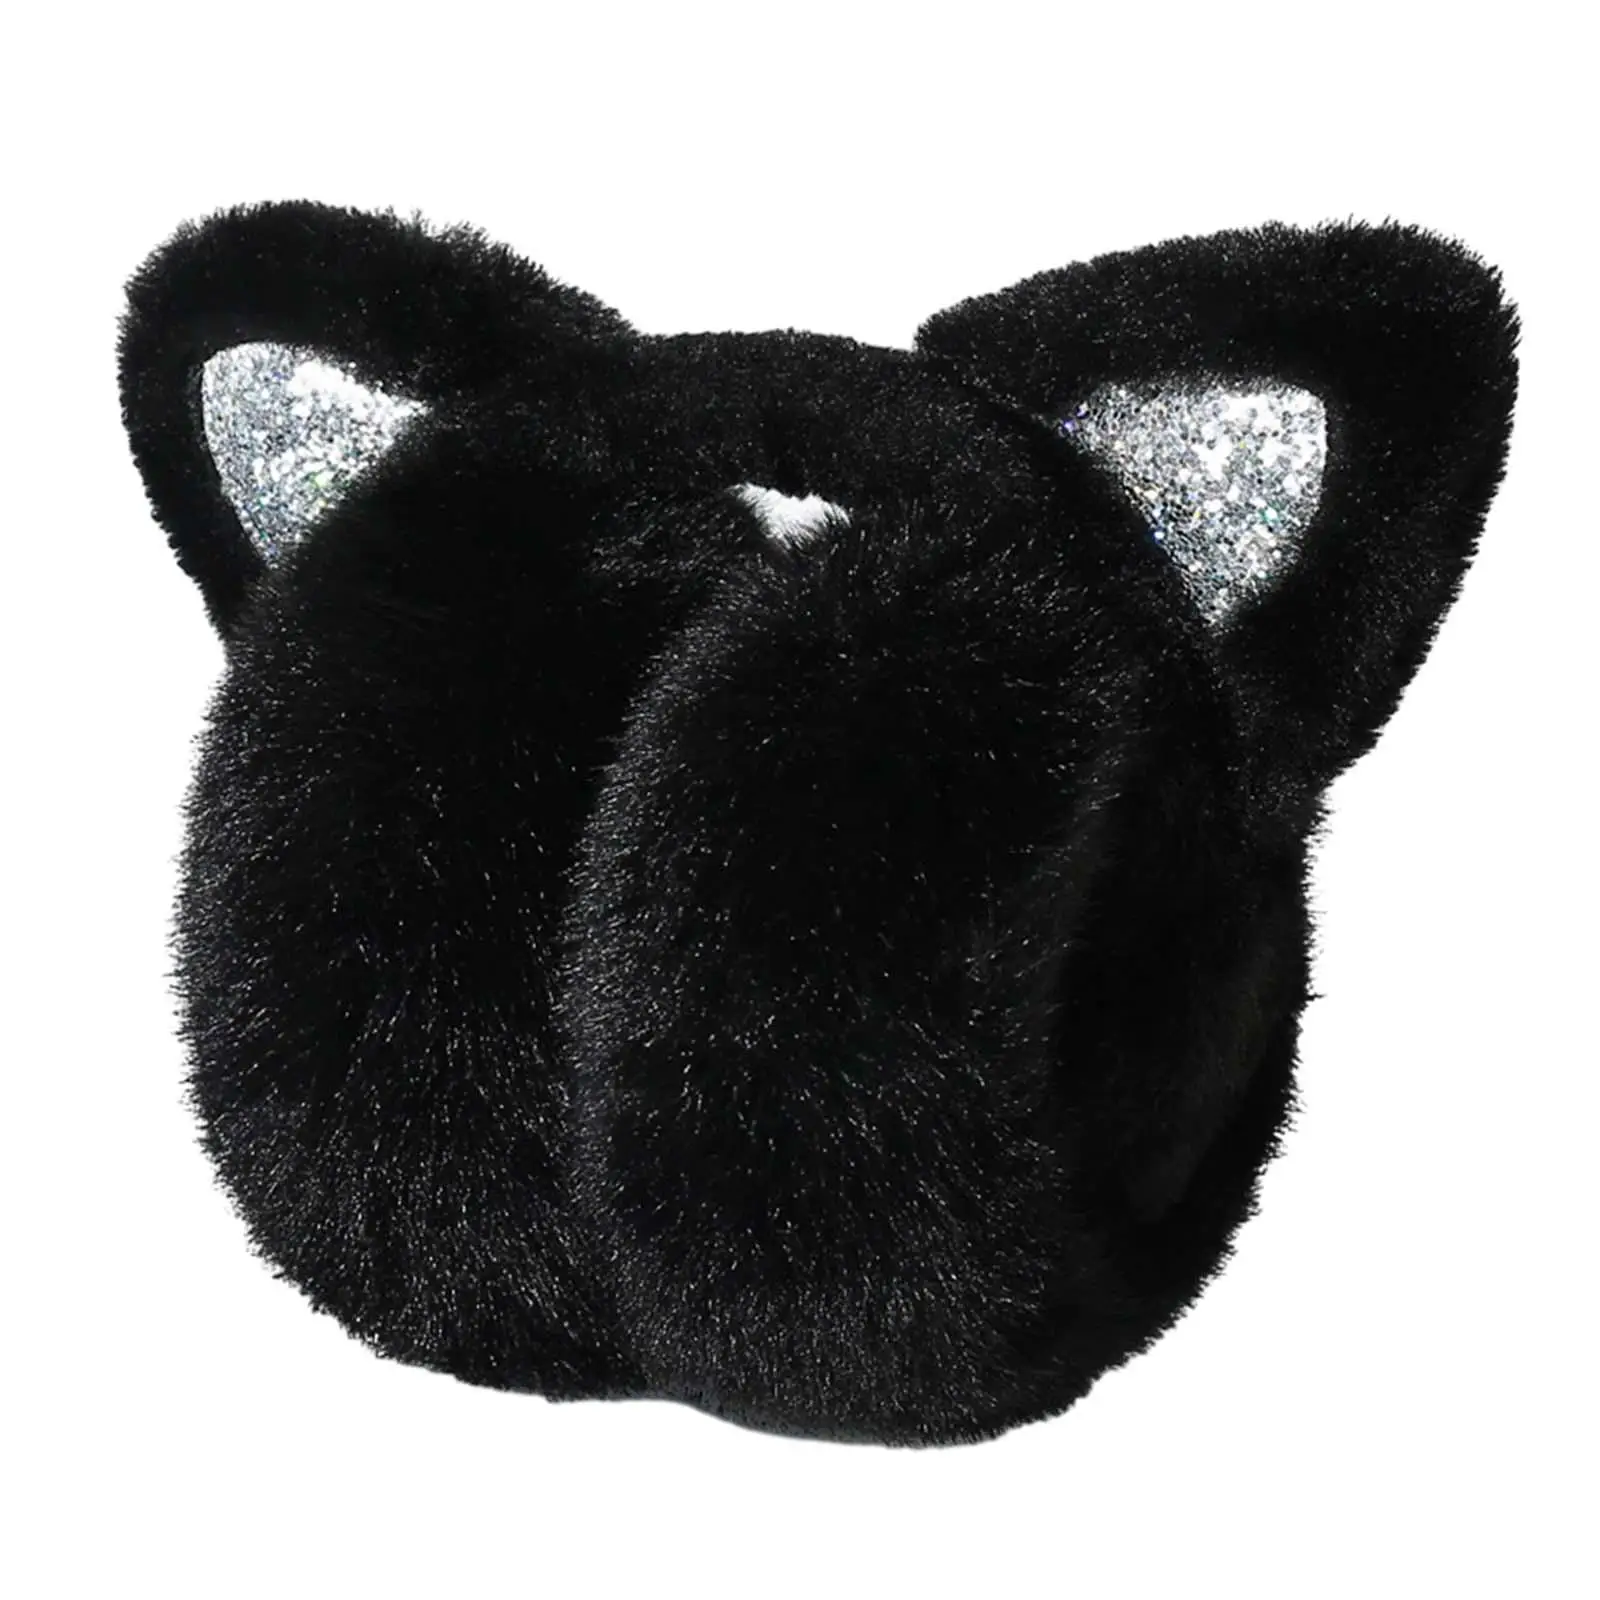 Earmuffs Foldable Premium Women Warm Soft Ear Warmers Winter Ear Muffs Ear Cover for Cold Weather Skating Cycling Skiing Outdoor